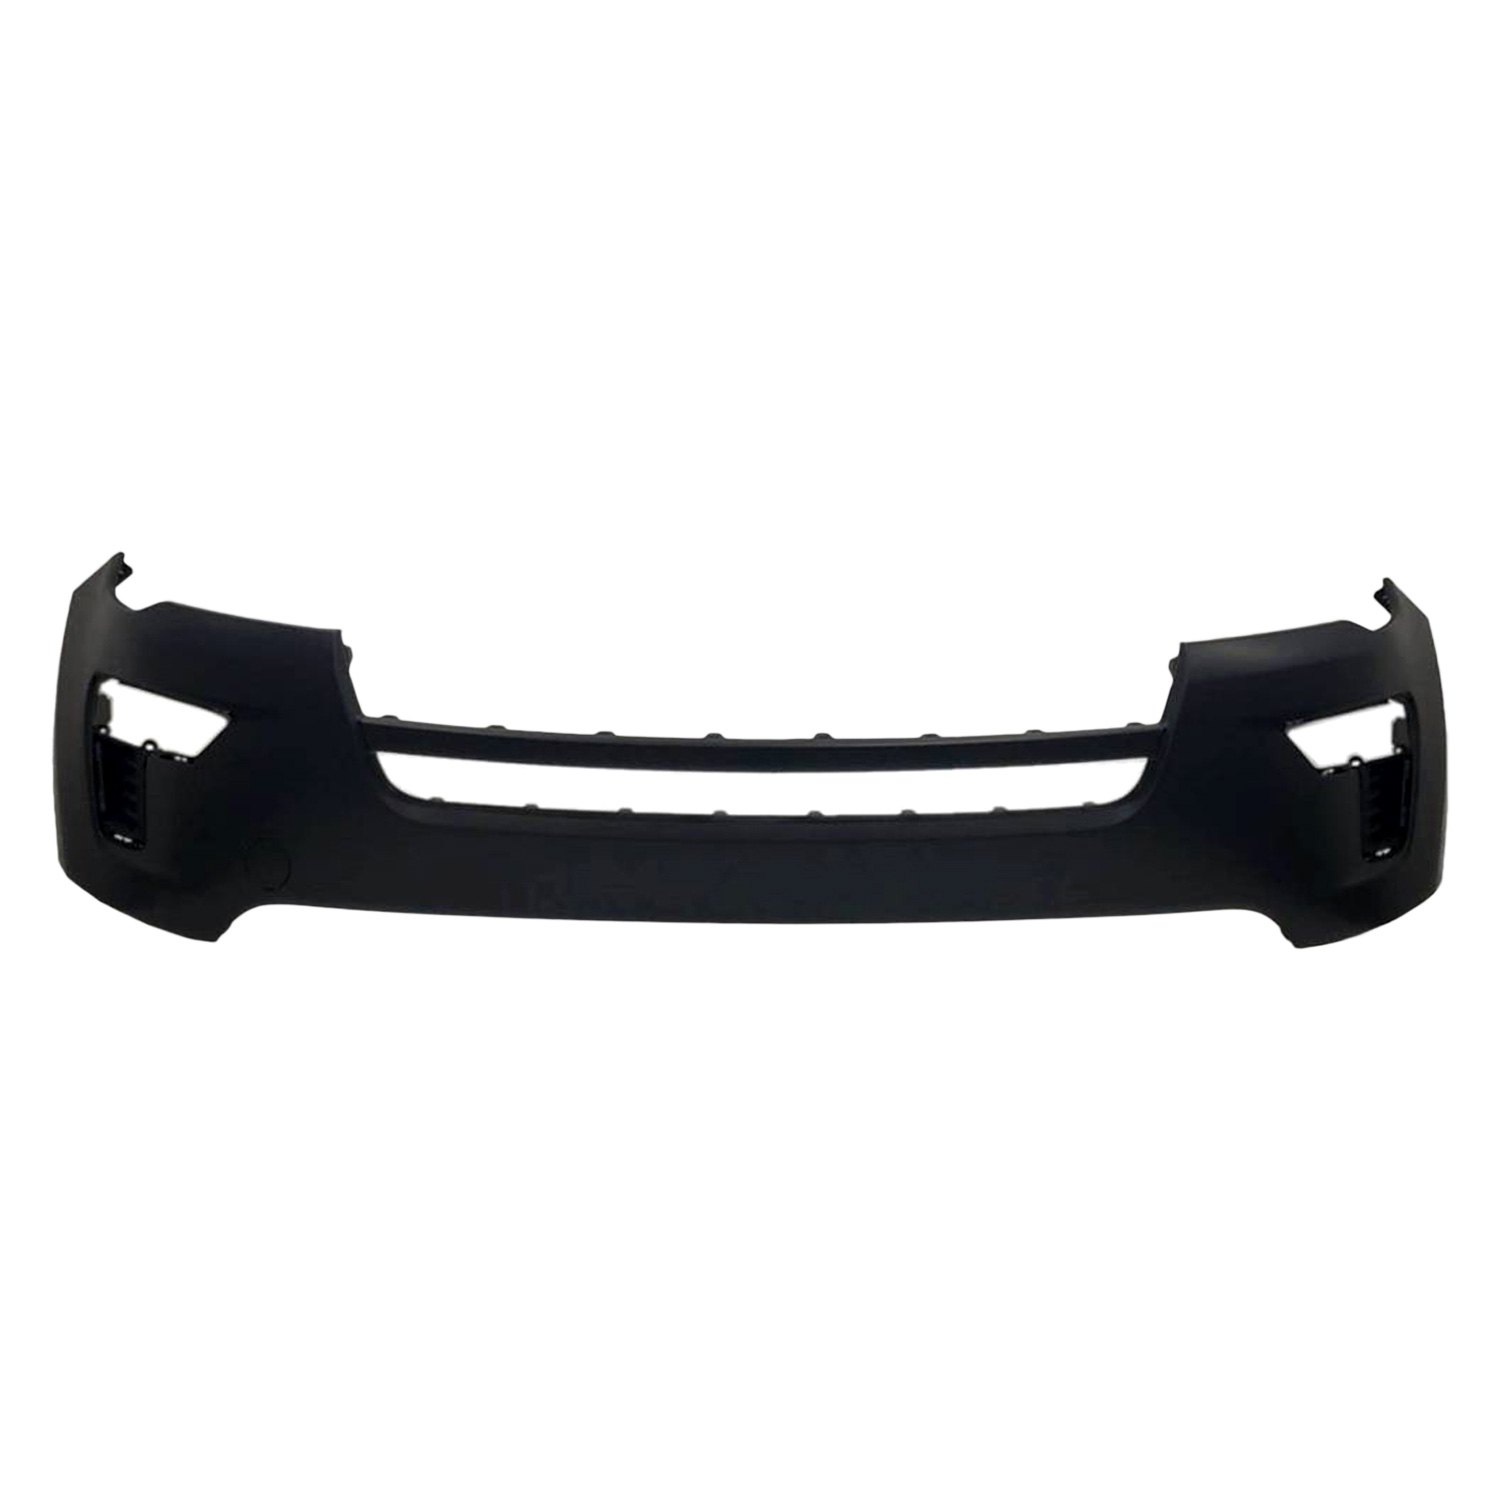 Replace® Fo1014130 Front Upper Bumper Cover Standard Line 6242